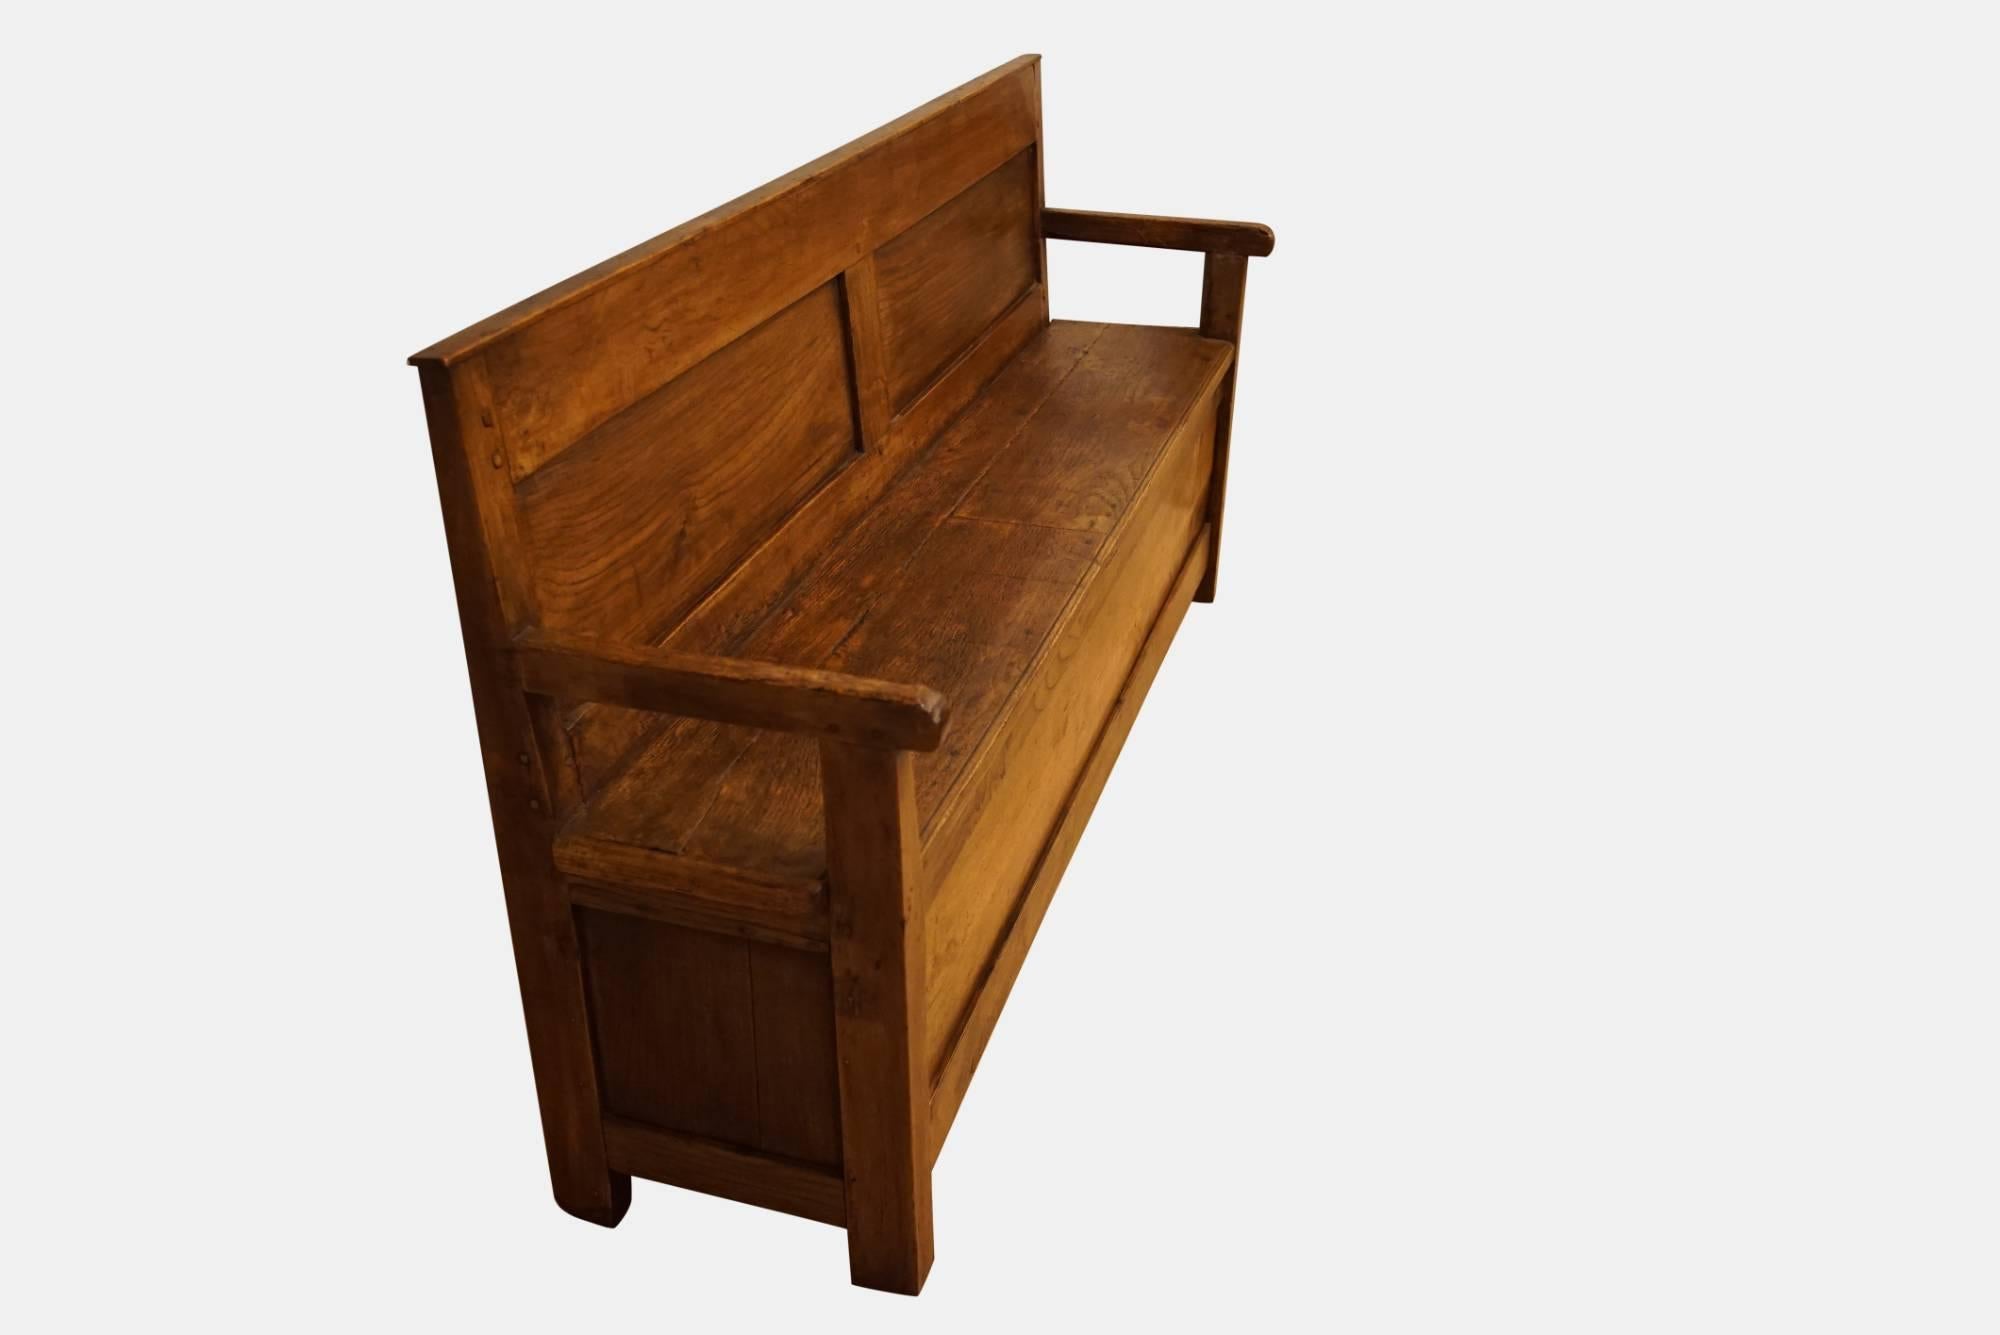 Large chestnut bench from Brittany, circa 1890.